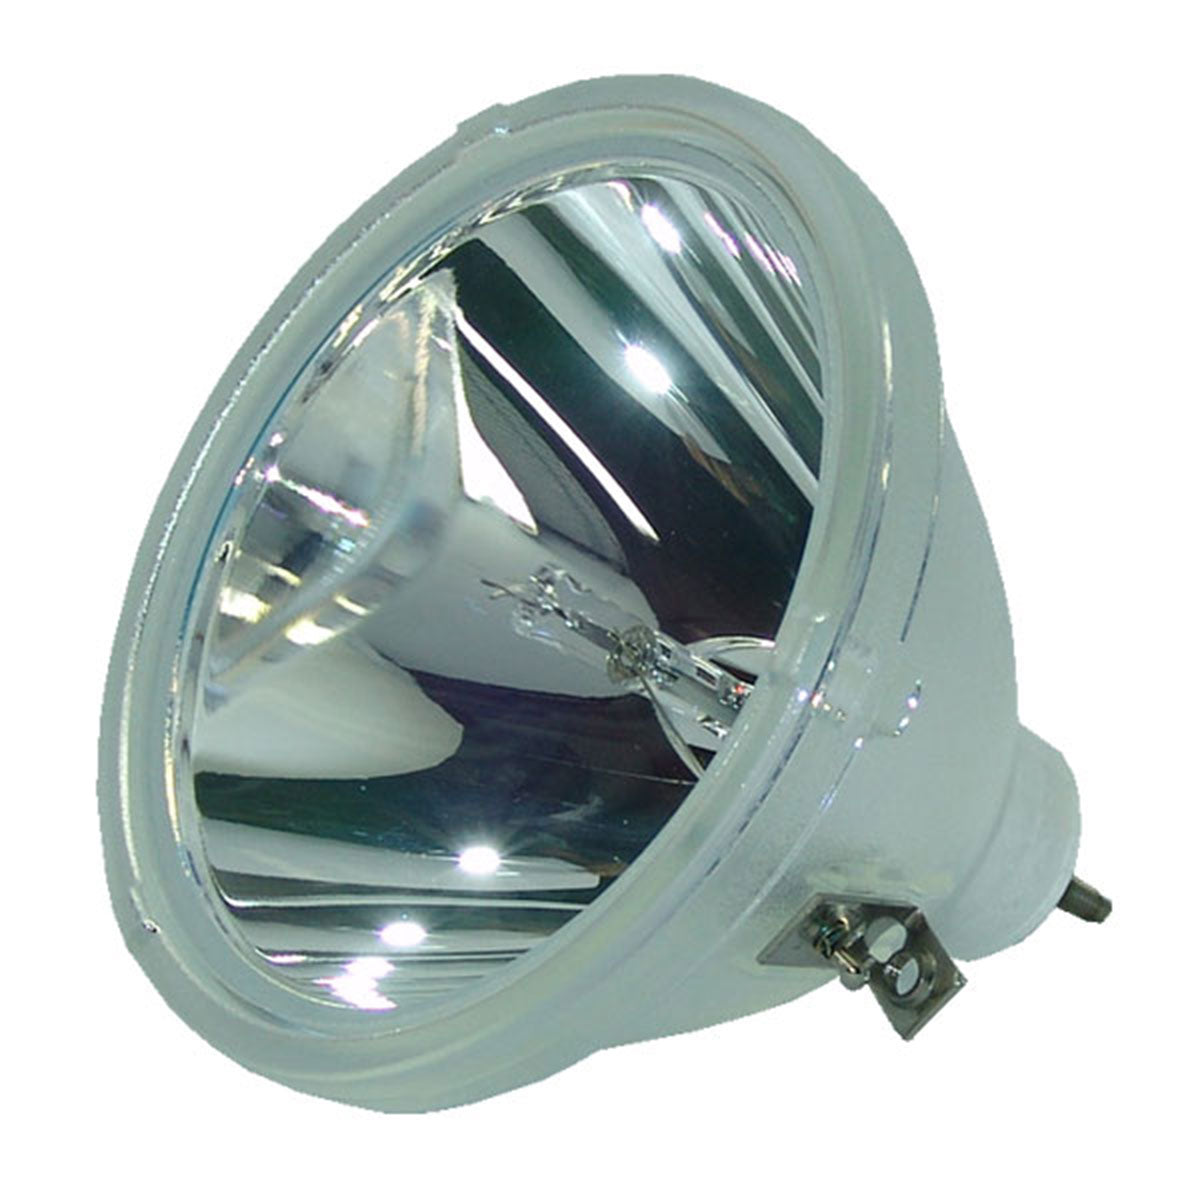 Barco R5976254 Philips Bare TV Lamp